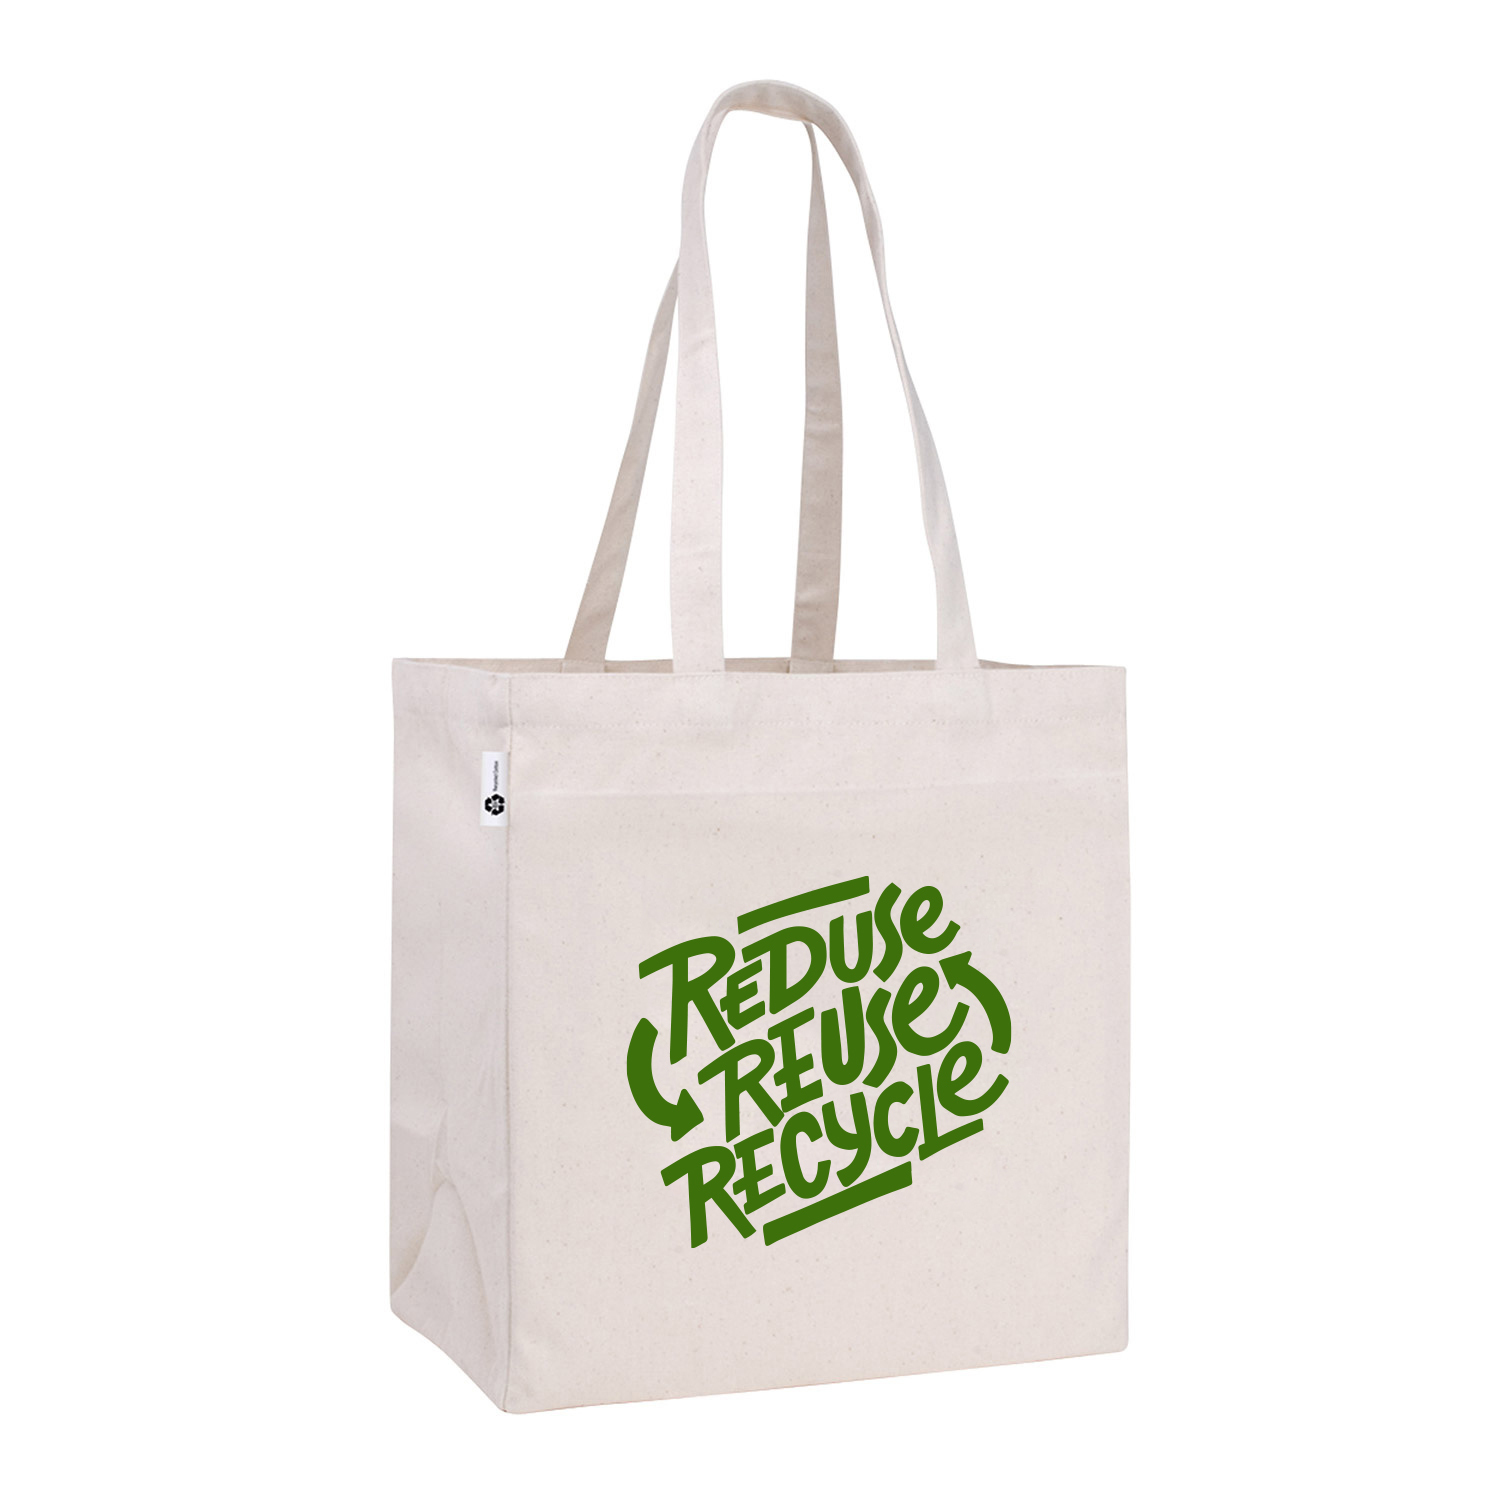 Be The Change Earth Inspirational Grocery Travel Reusable Tote Bag 